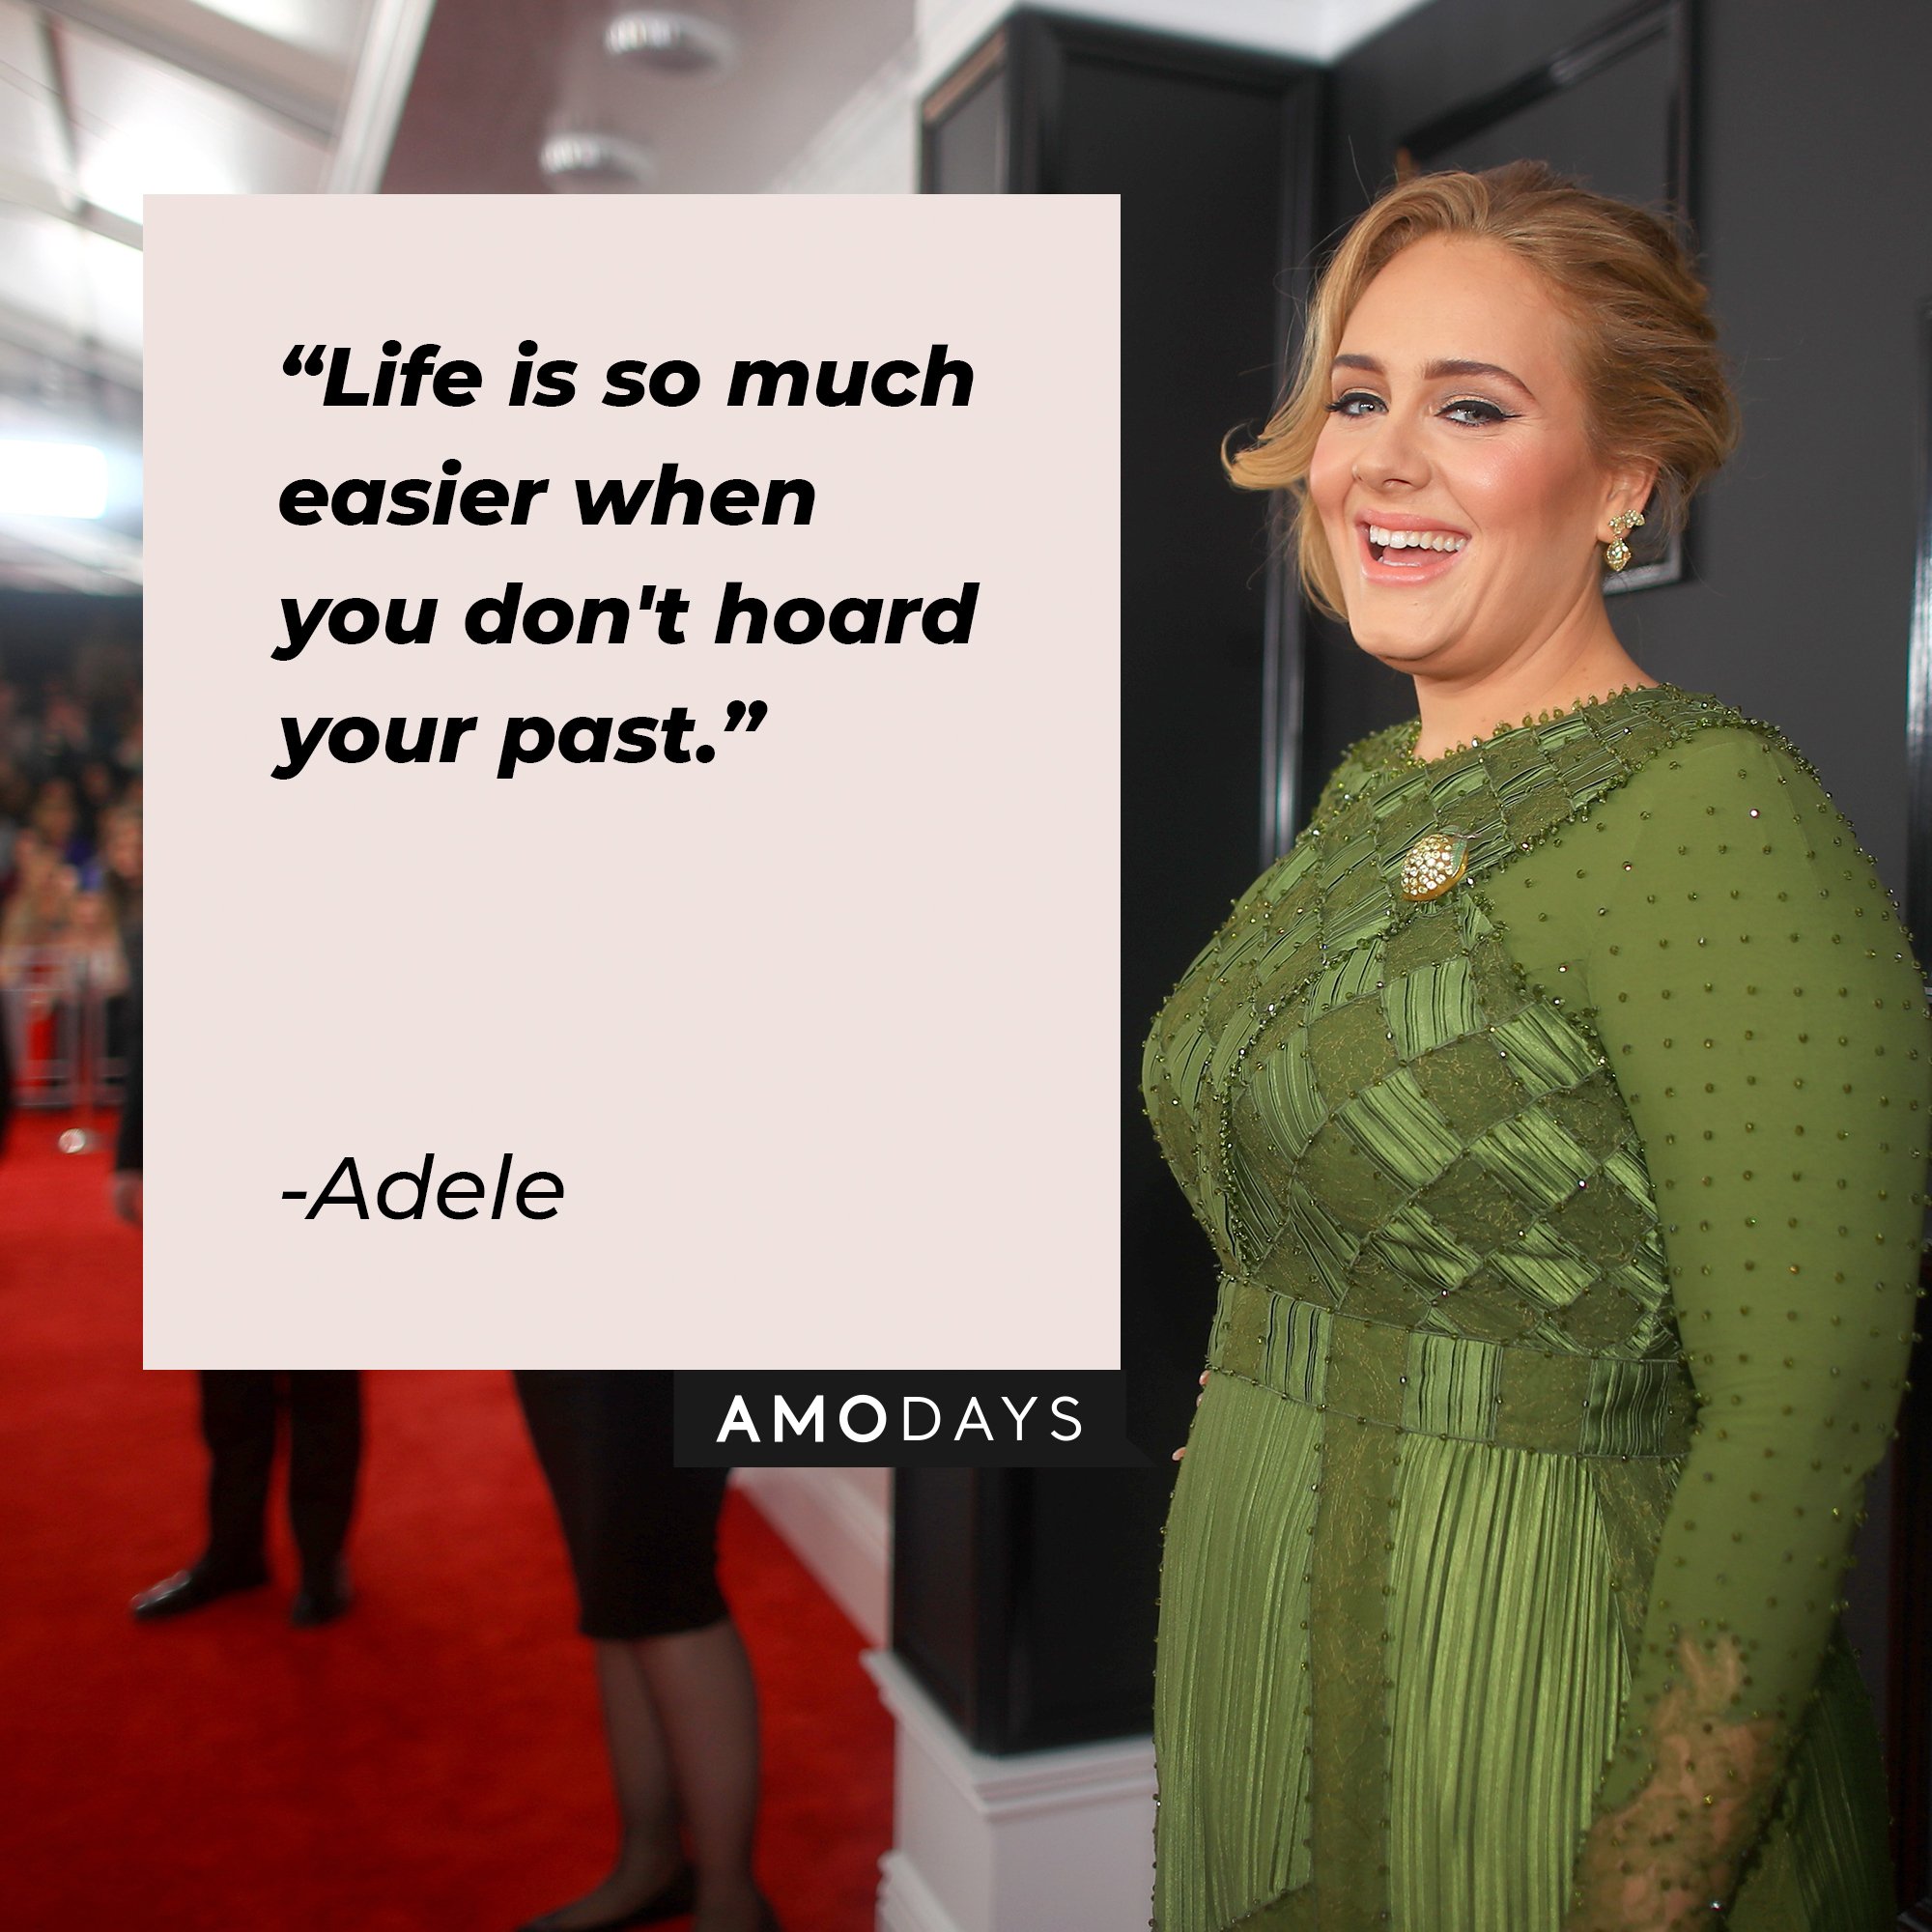 Adele’s quote "Life is so much easier when you don't hoard your past." | Image: AmoDays